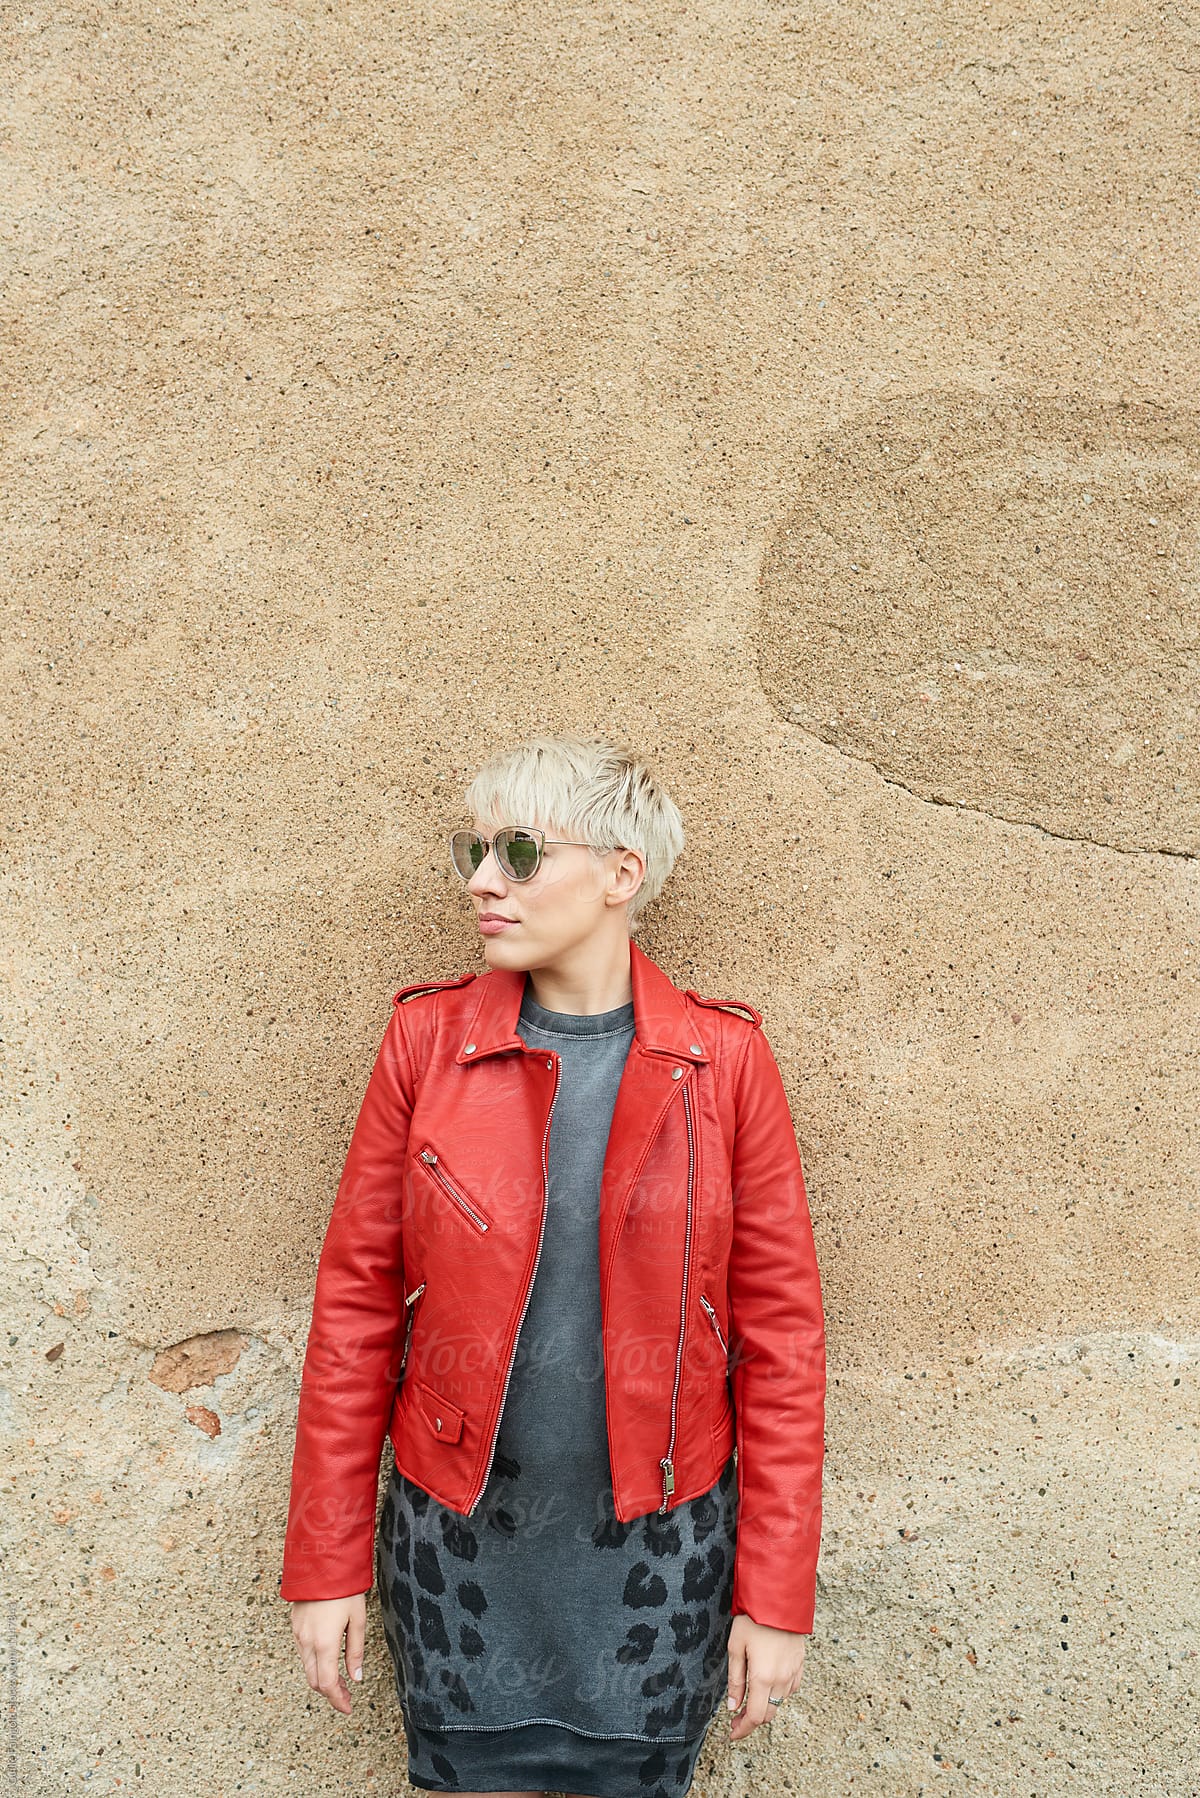 short-haired blonde in red jacket and dress